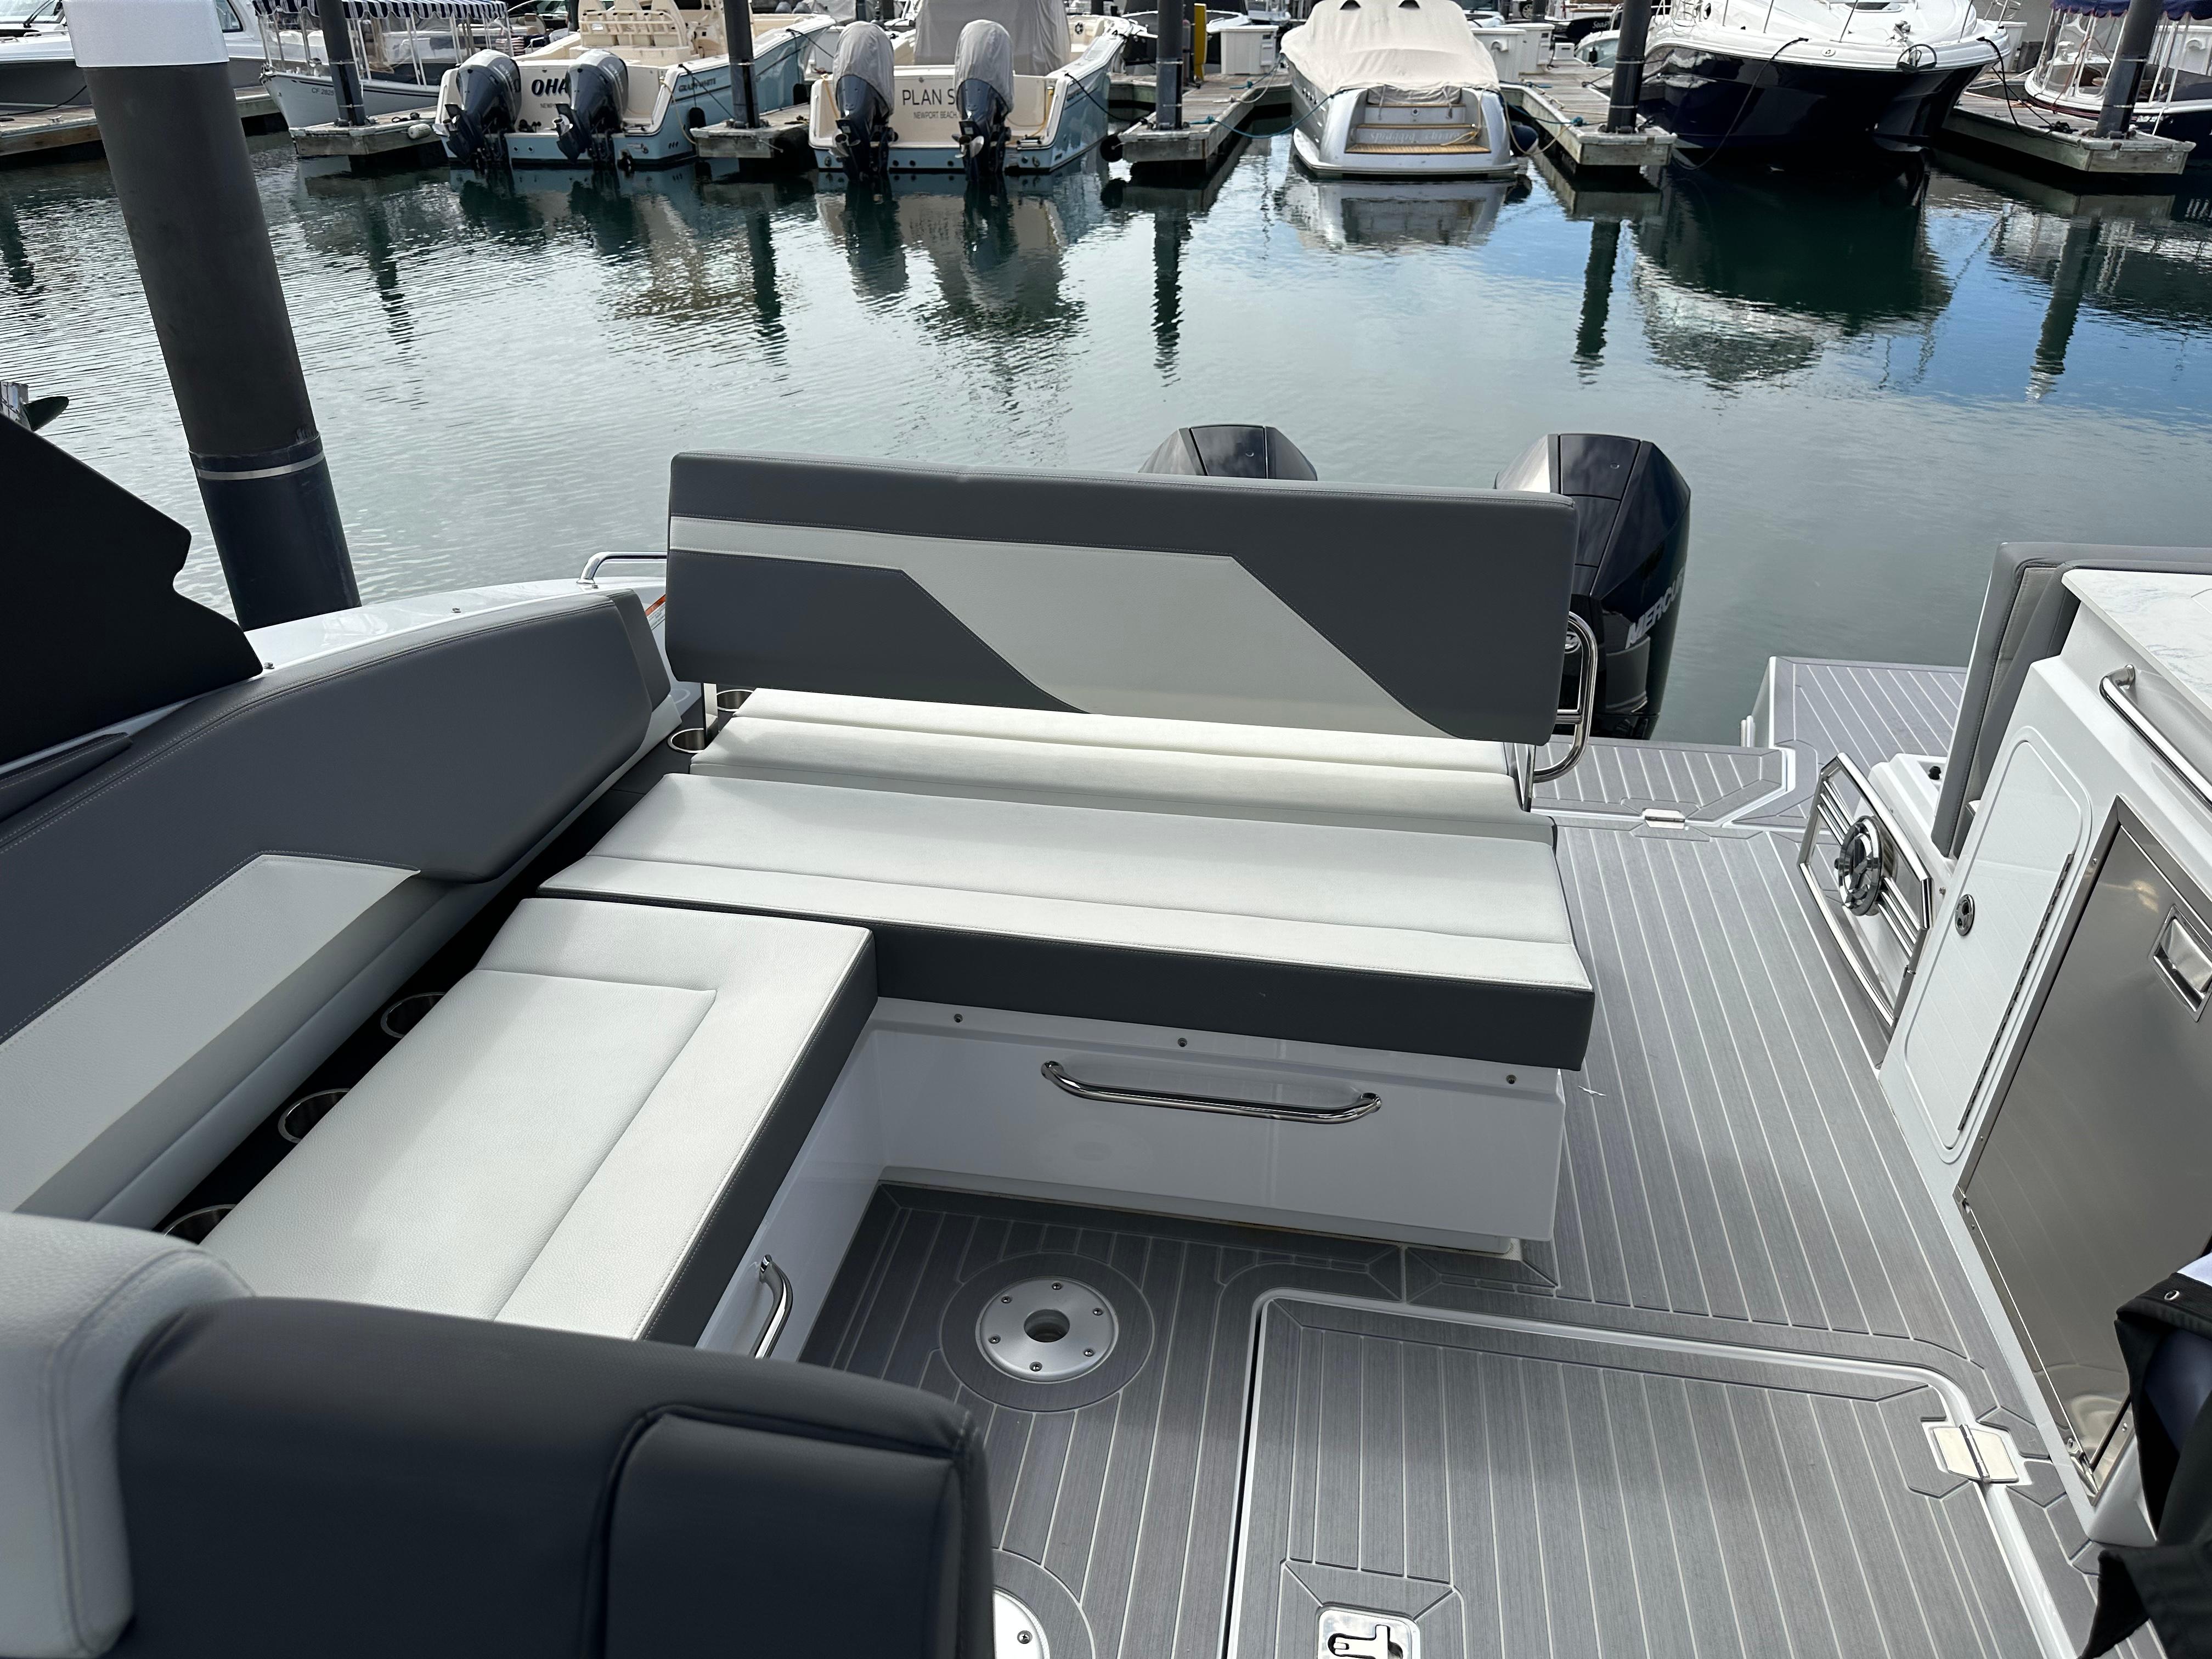 Starboard side L shape seating converts to sunlounge